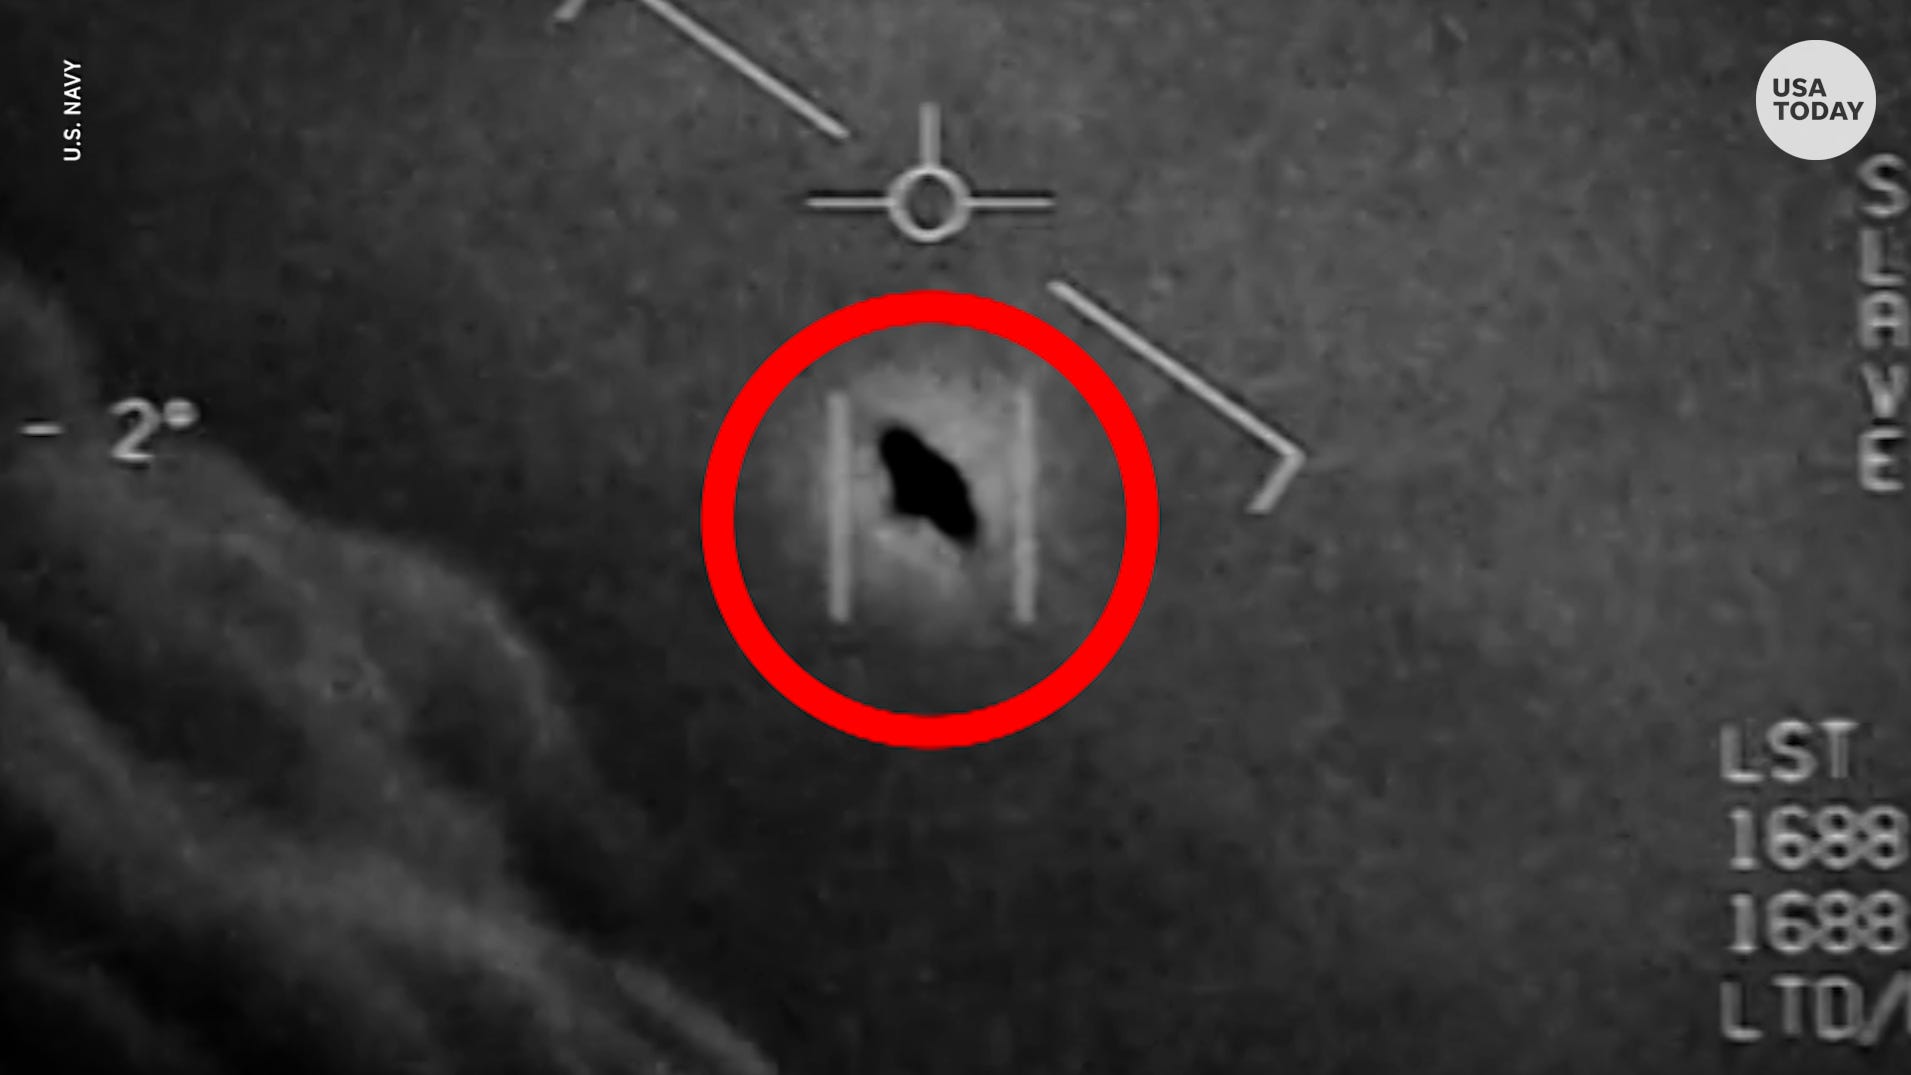 NASA announces group that will study UFOs; report to come out in 2023